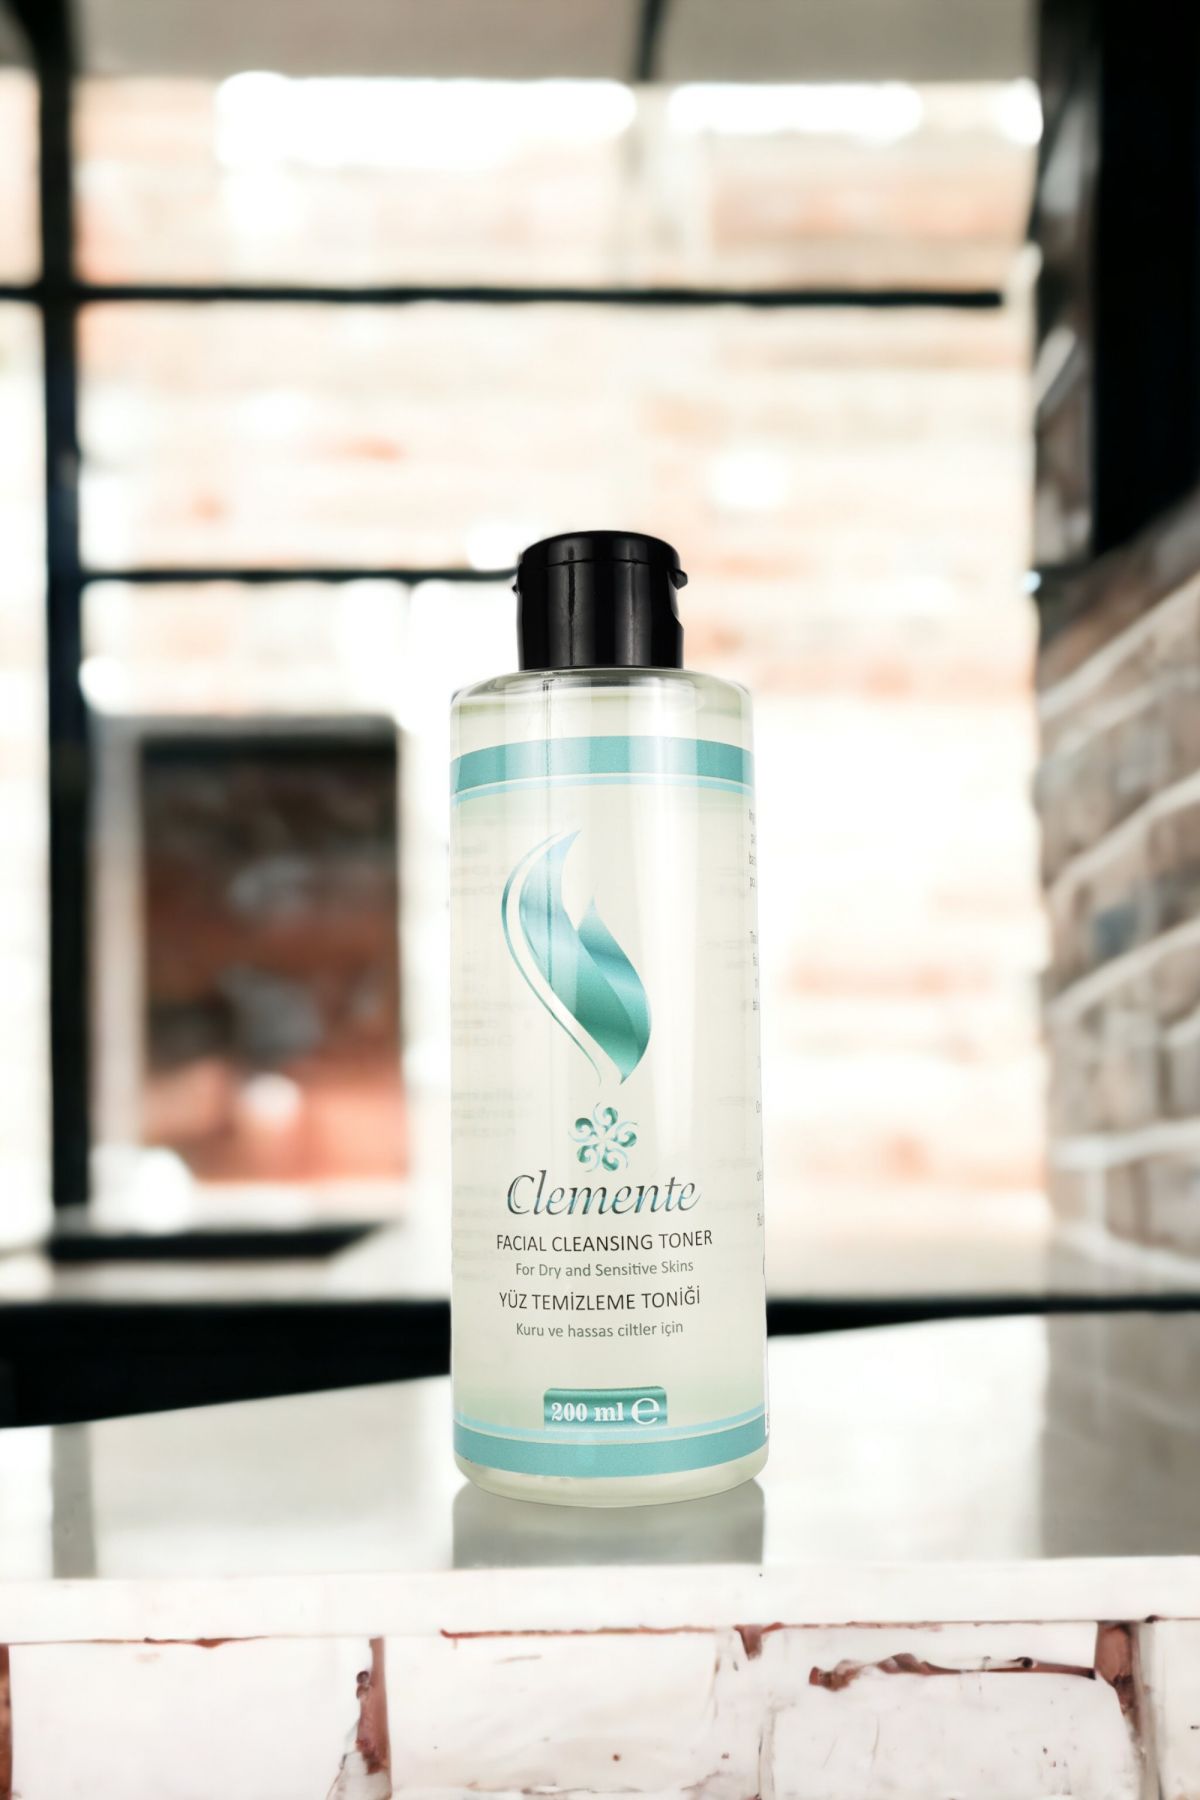 Clemente Facial Cleansing Toner (Facial Cleansing Toner 200ml)(For Dry and Sensitive Skin)